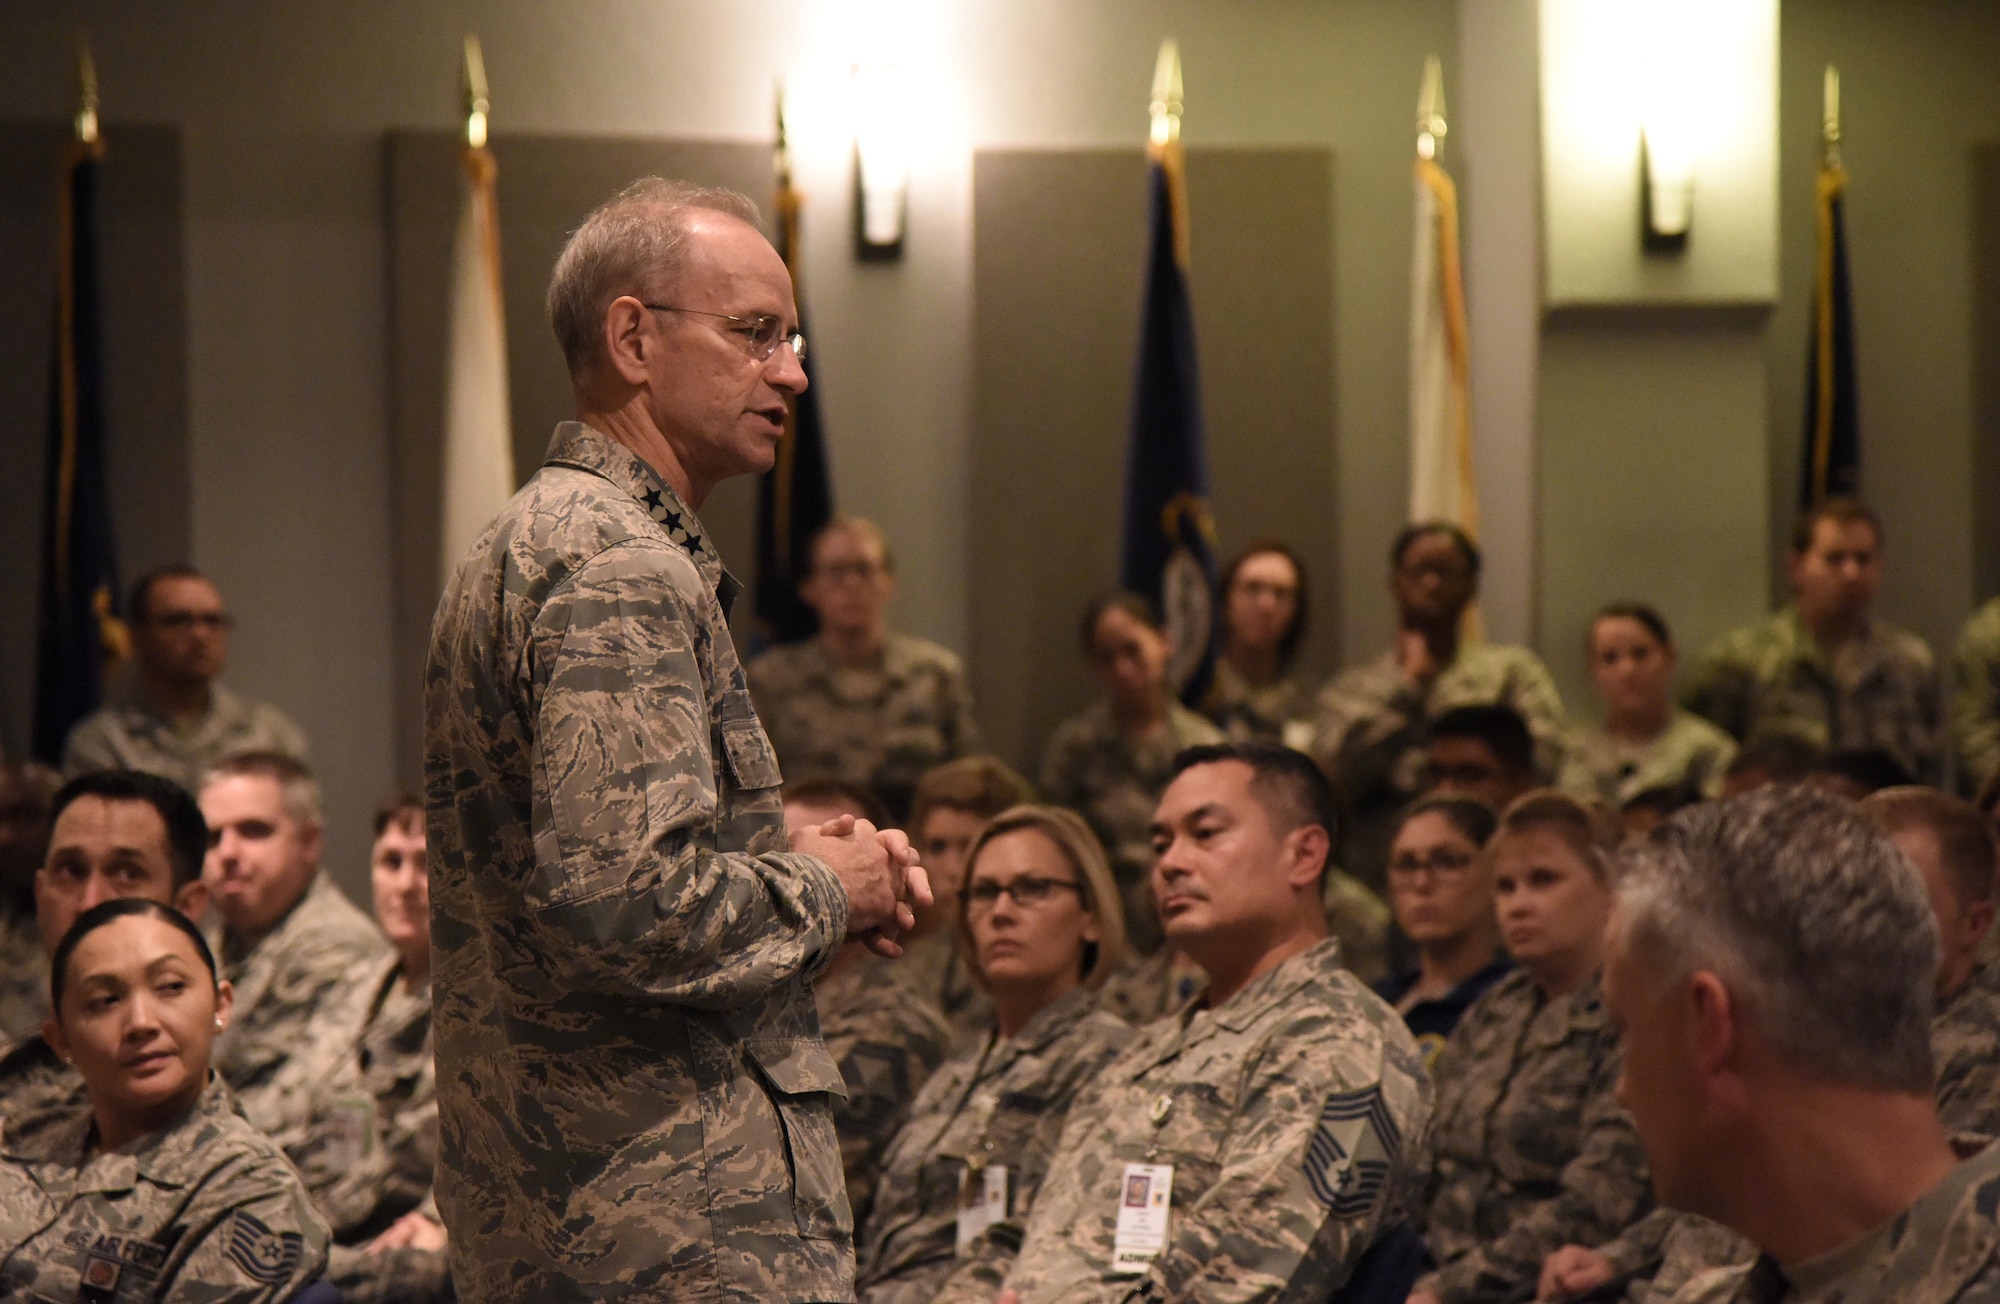 Lt. Gen. Mark Ediger, Air Force Surgeon General, delivers remarks during an all-call at the 81st Medical Center’s Don Wiley Auditorium Oct. 17, 2017, on Keesler Air Force Base, Mississippi. The purpose of Ediger’s visit was to get familiar with the 81st Medical Group’s mission, operations and personnel. During his tour, he visited more than 10 different units in the 81st MDG to include mammography, emergency department, radiology and oncology, genetics and the clinical research lab. (U.S. Air Force photo by Kemberly Groue)